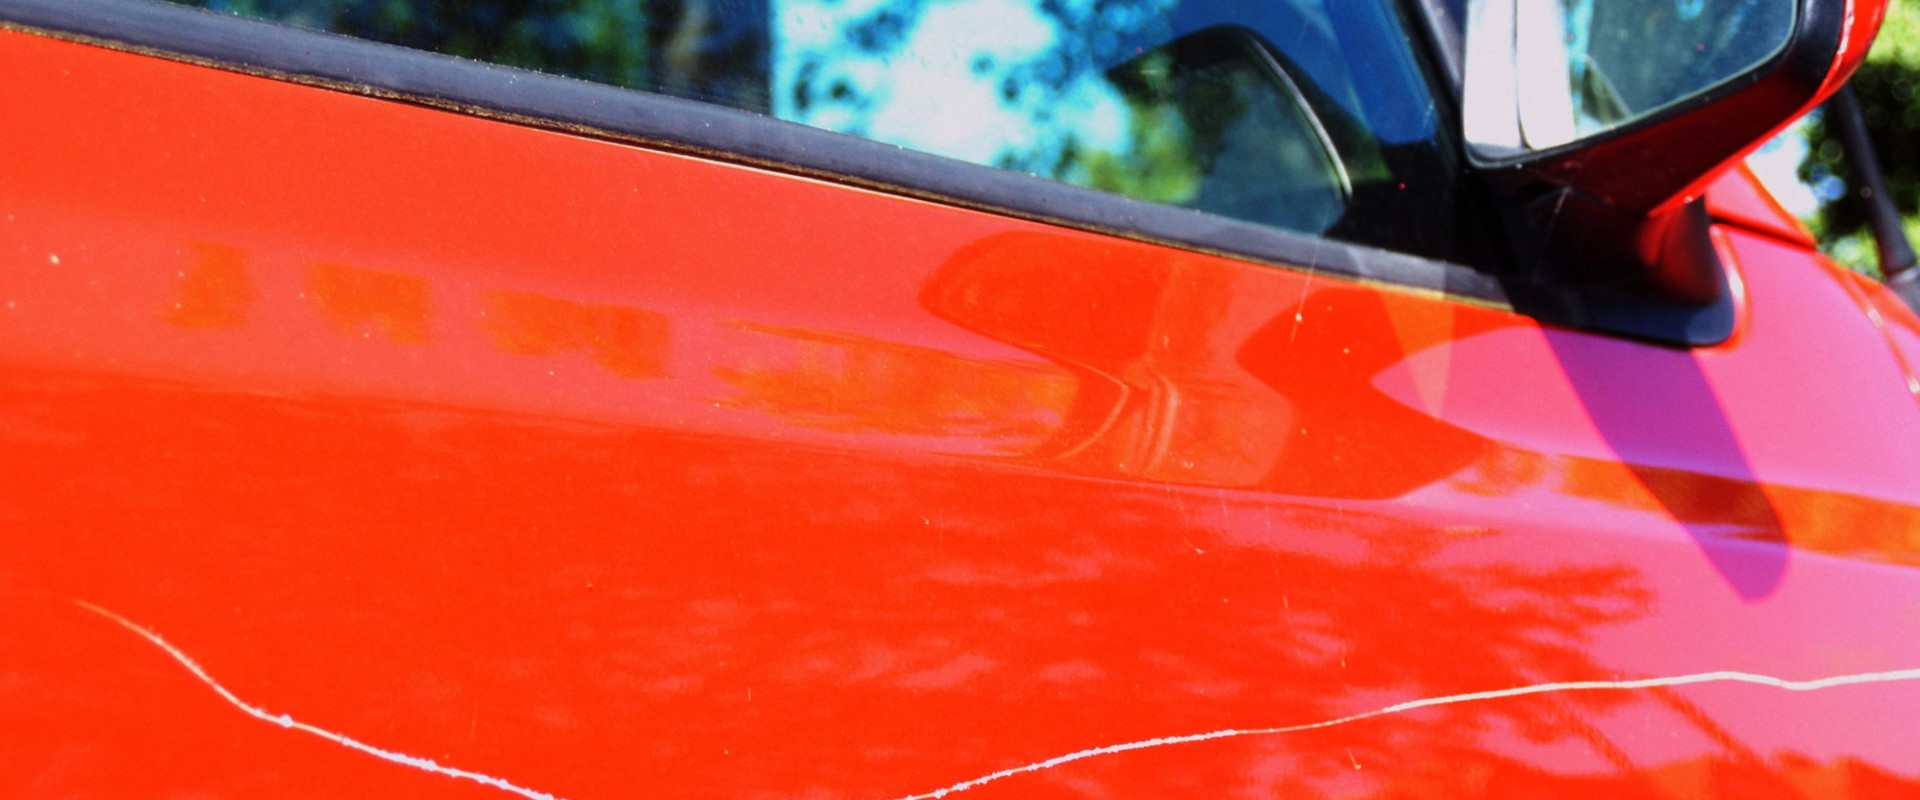 Can Car Detailing Remove Scratches?